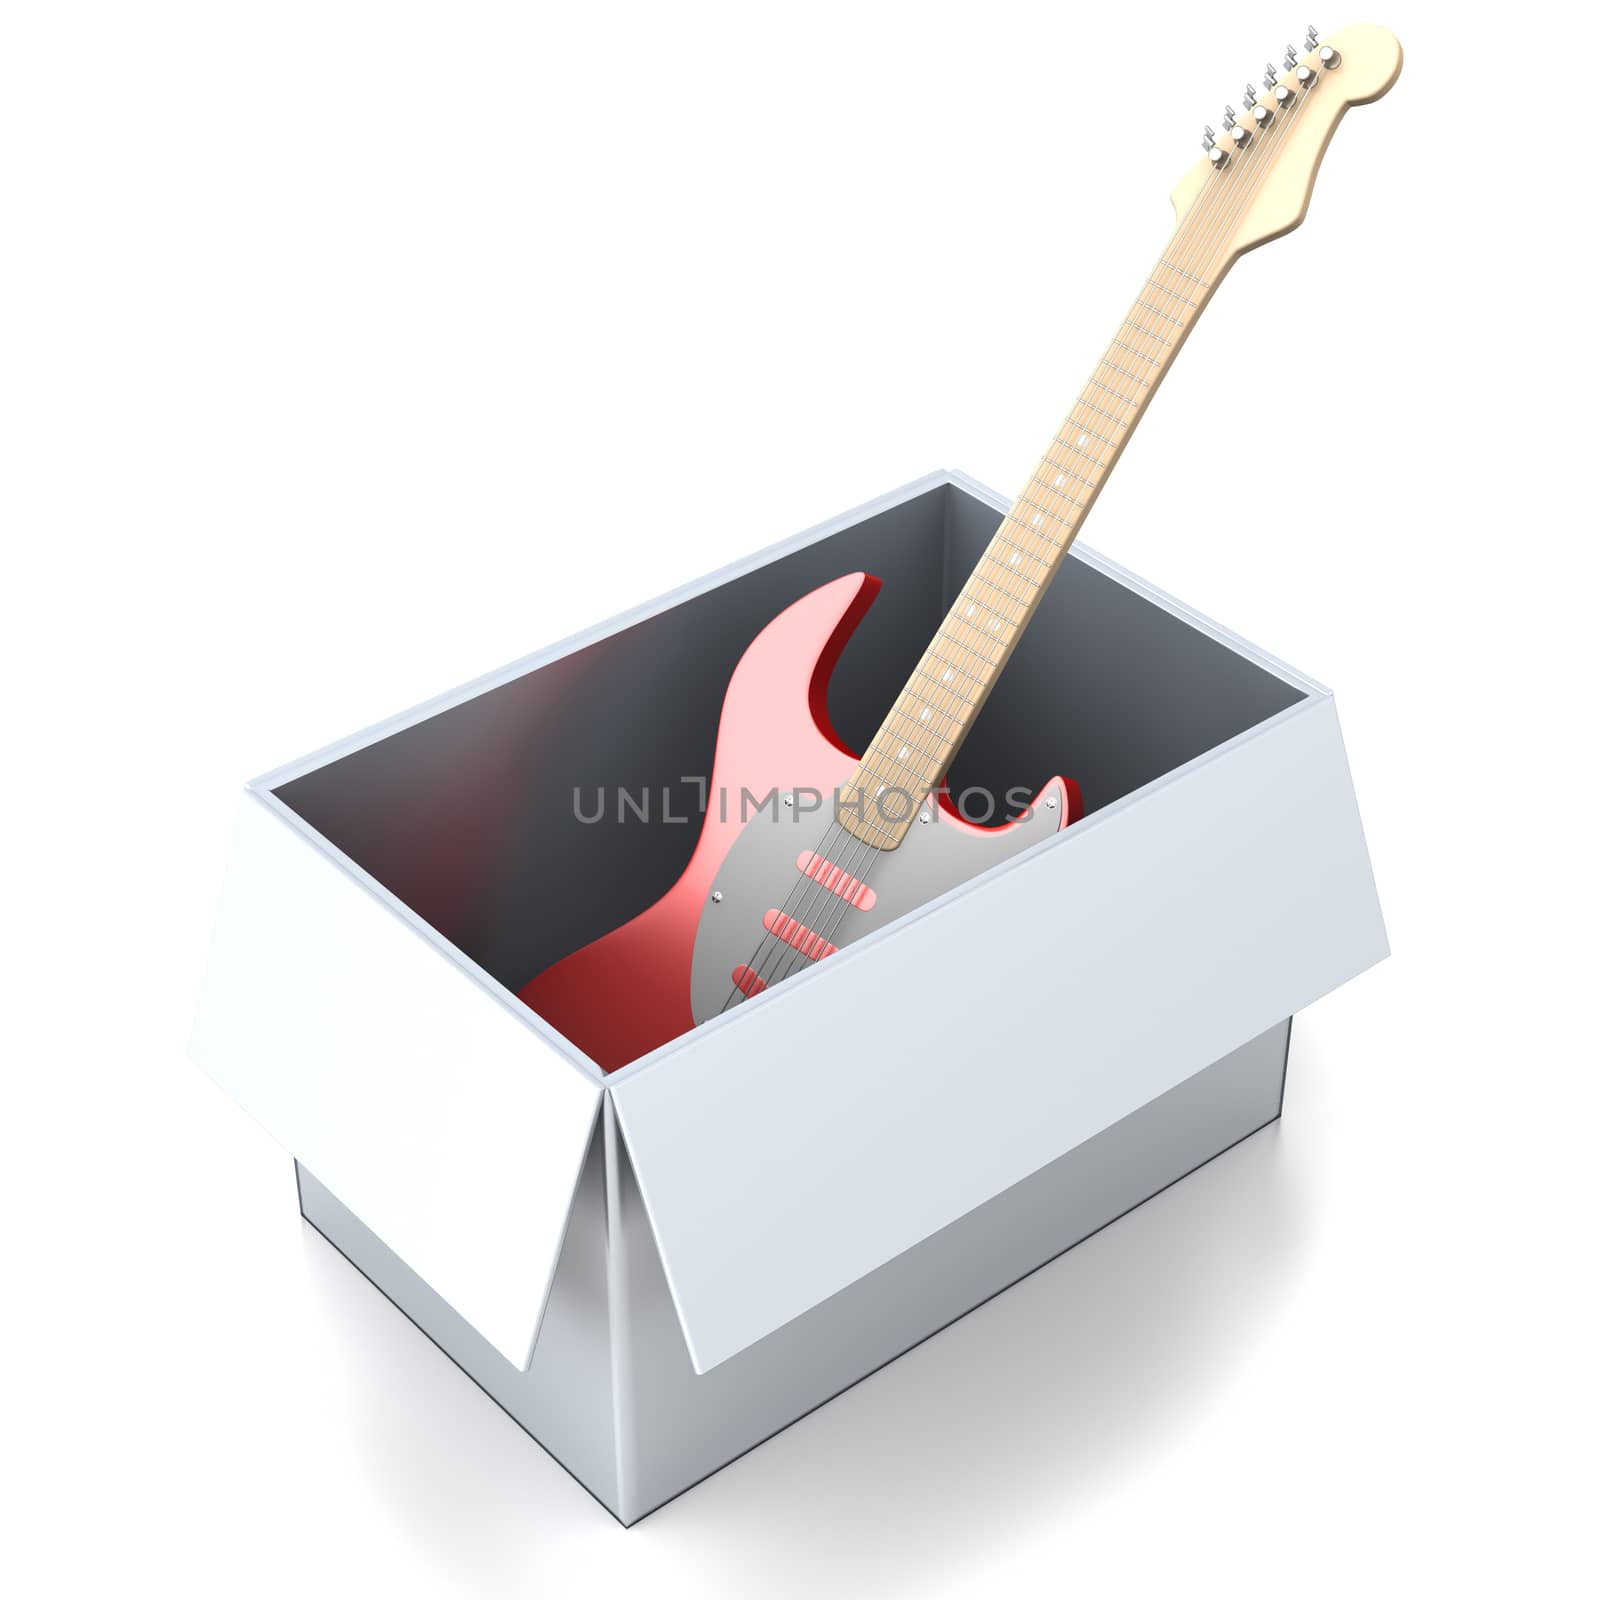 A guitar in a box. 3D rendered Illustration.